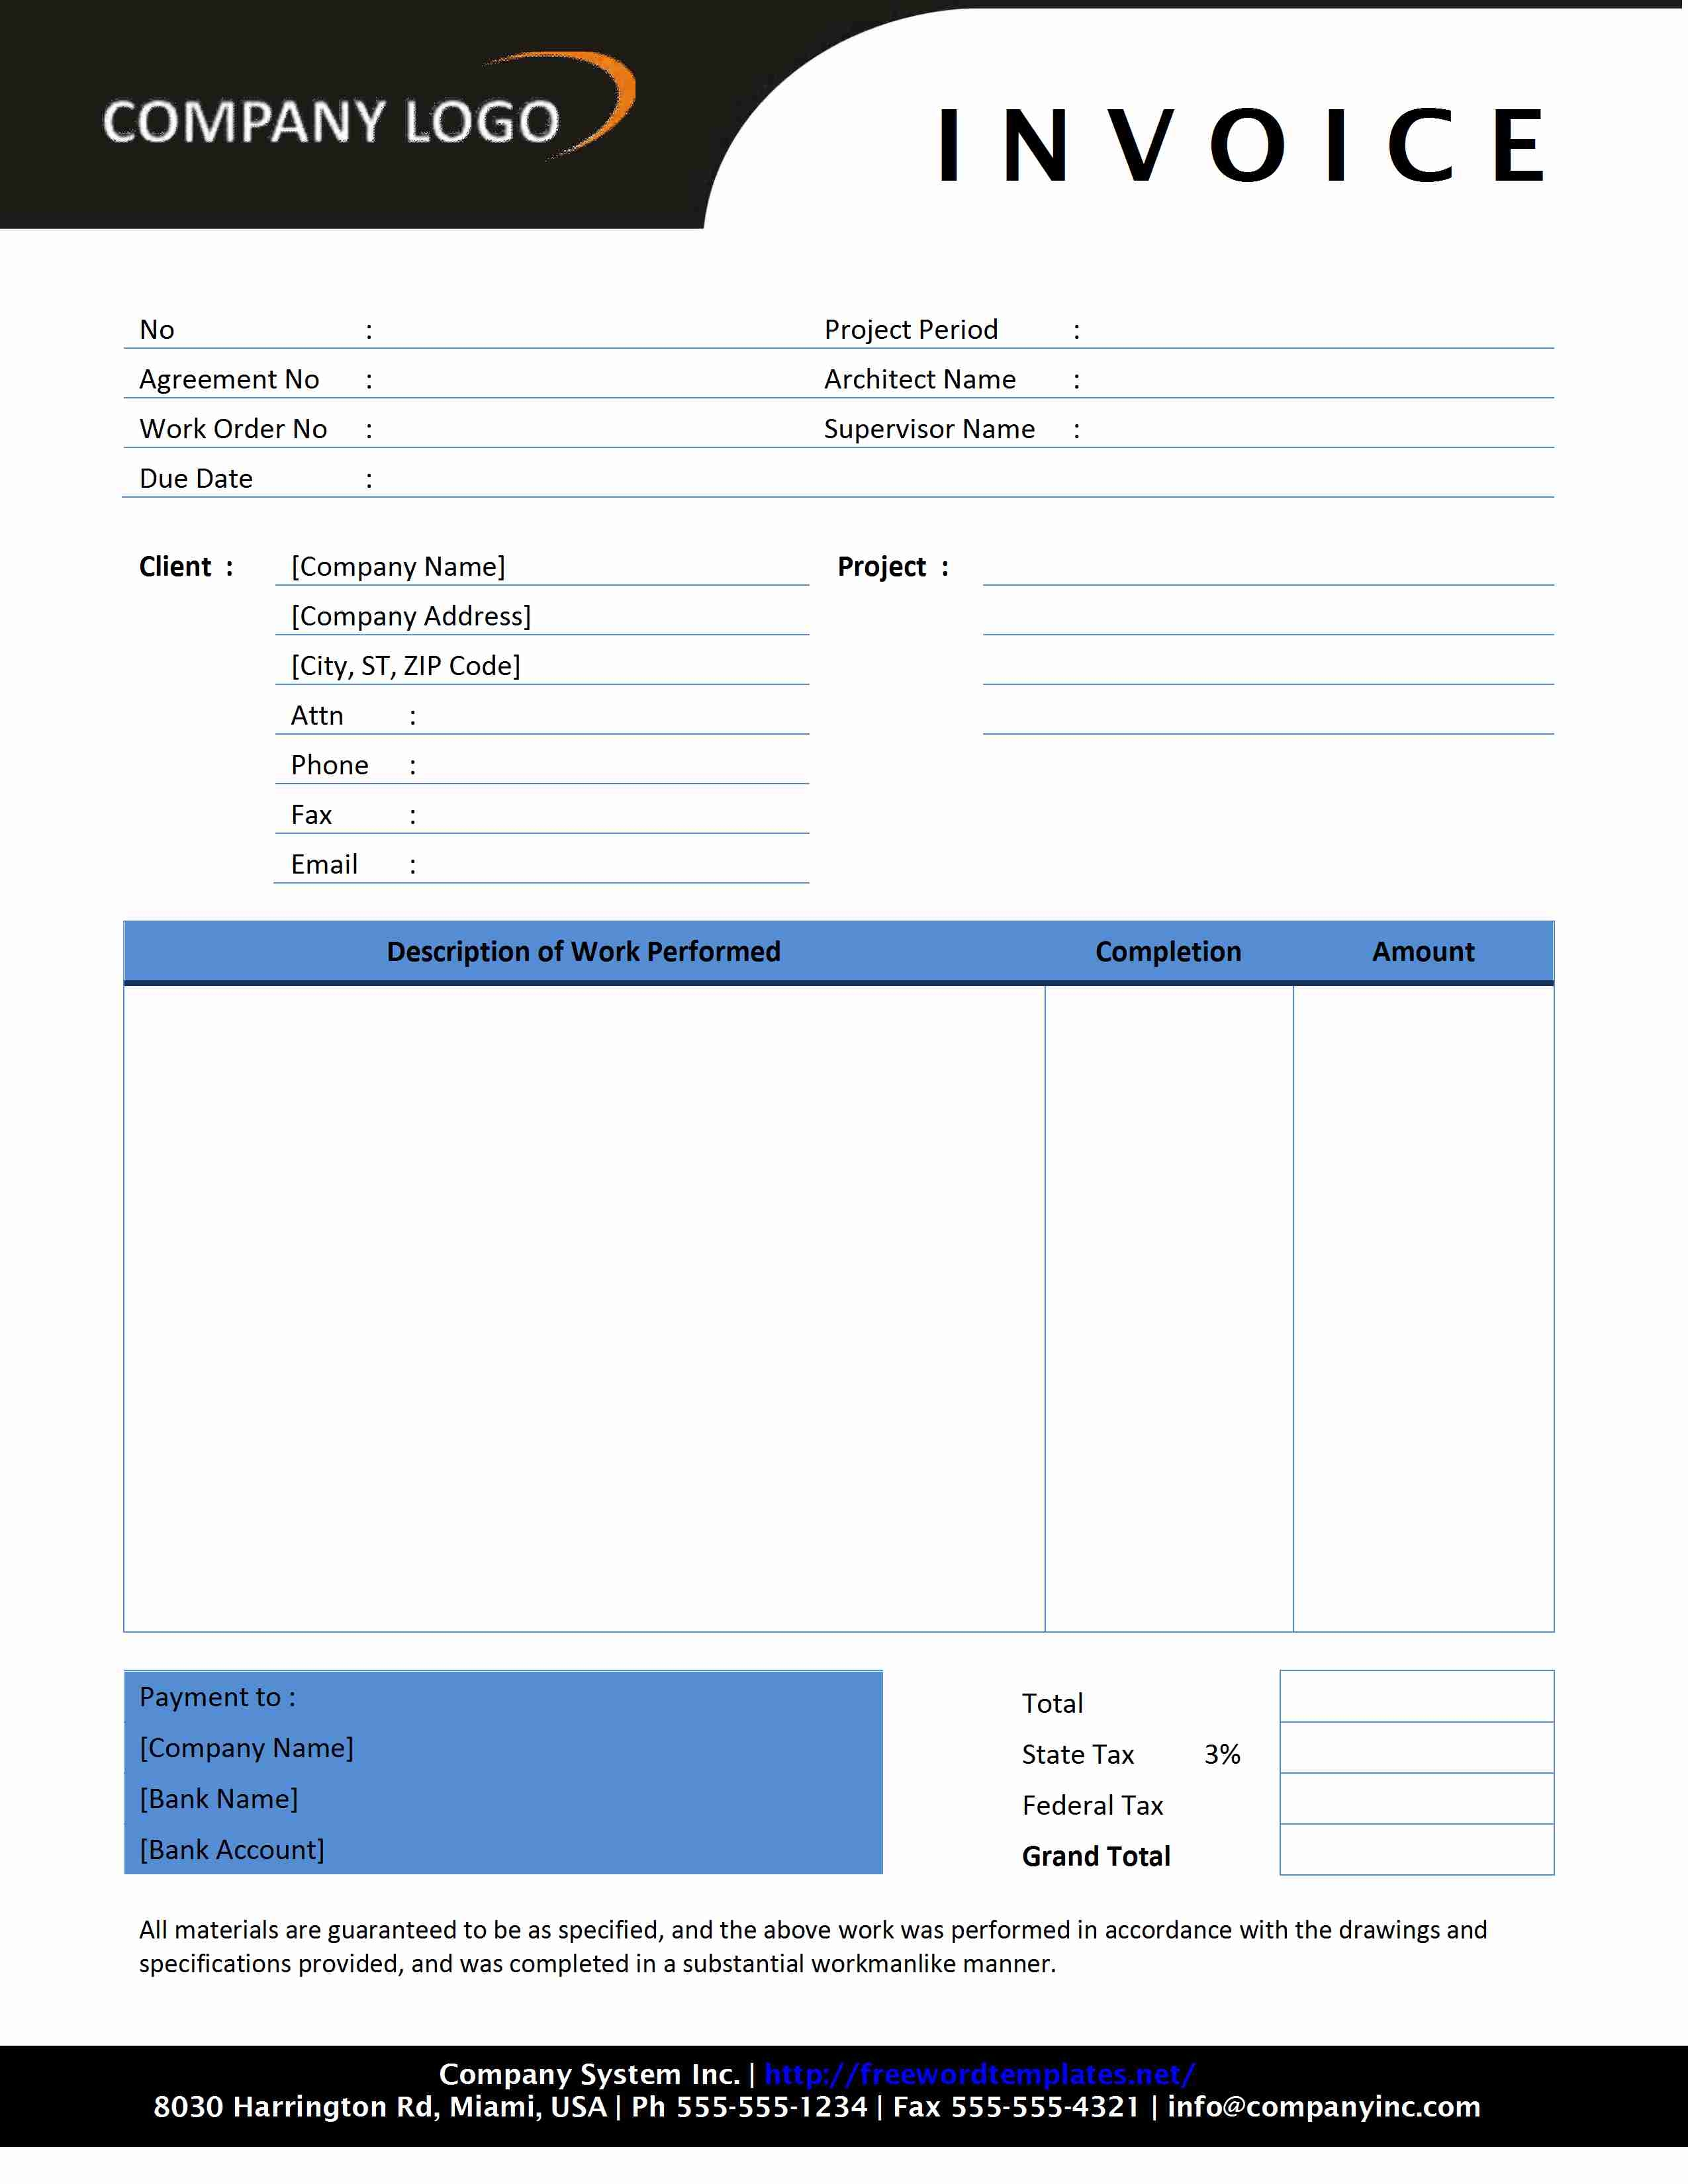 proforma invoice meaning